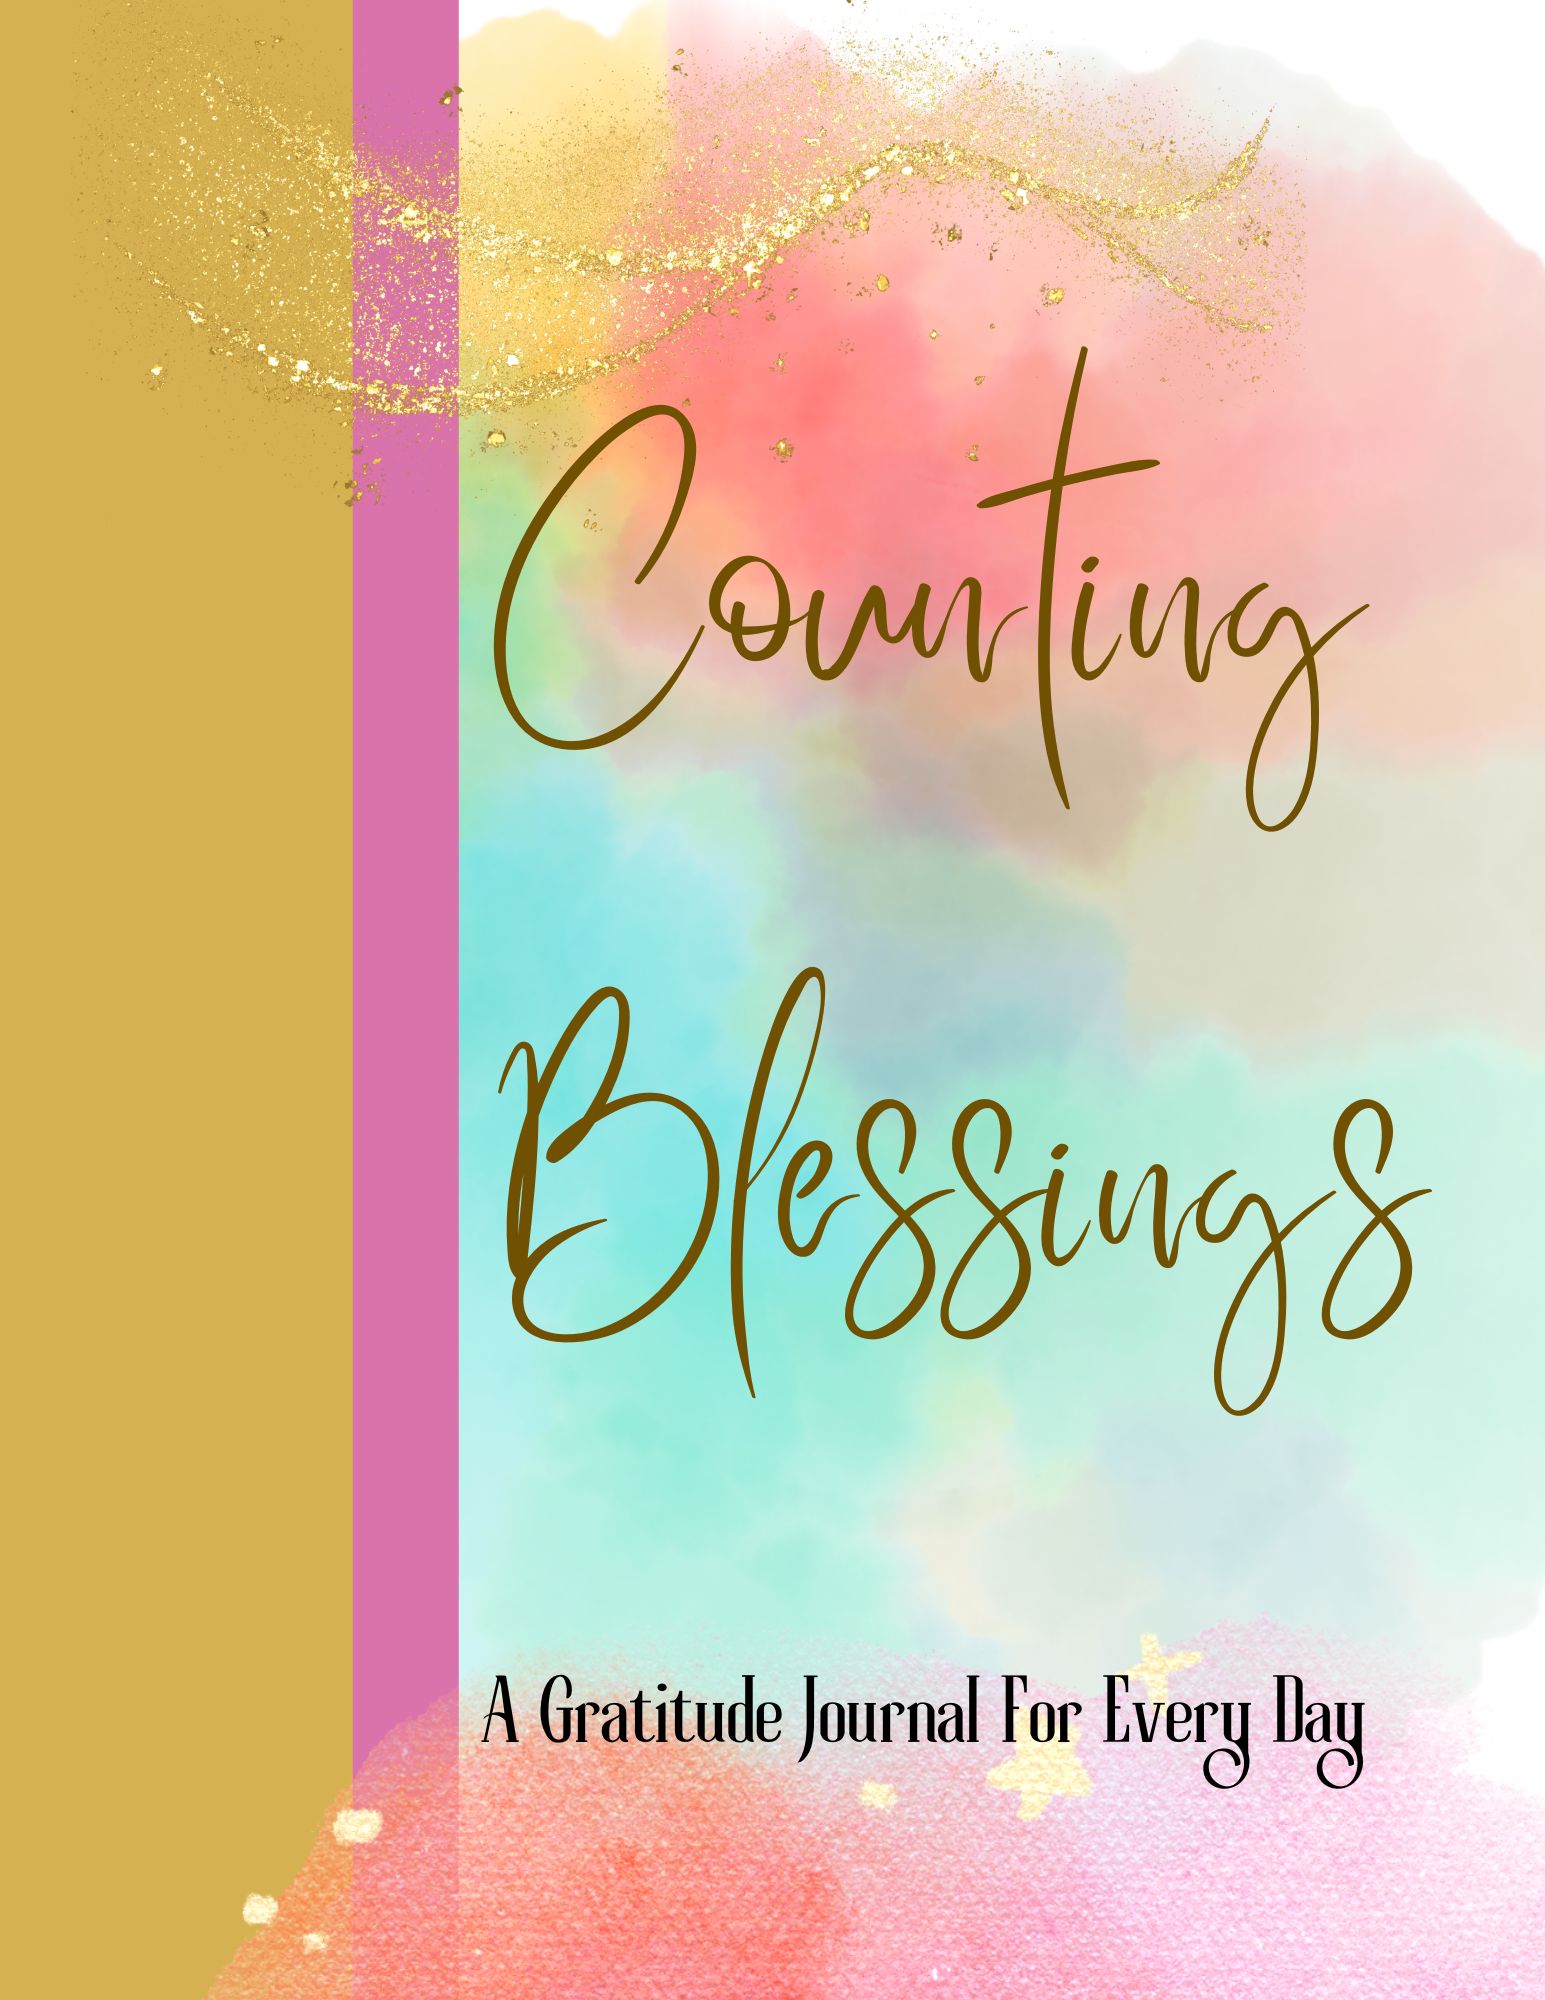 Counting Blessings - A Gratitude Journal For Everyday